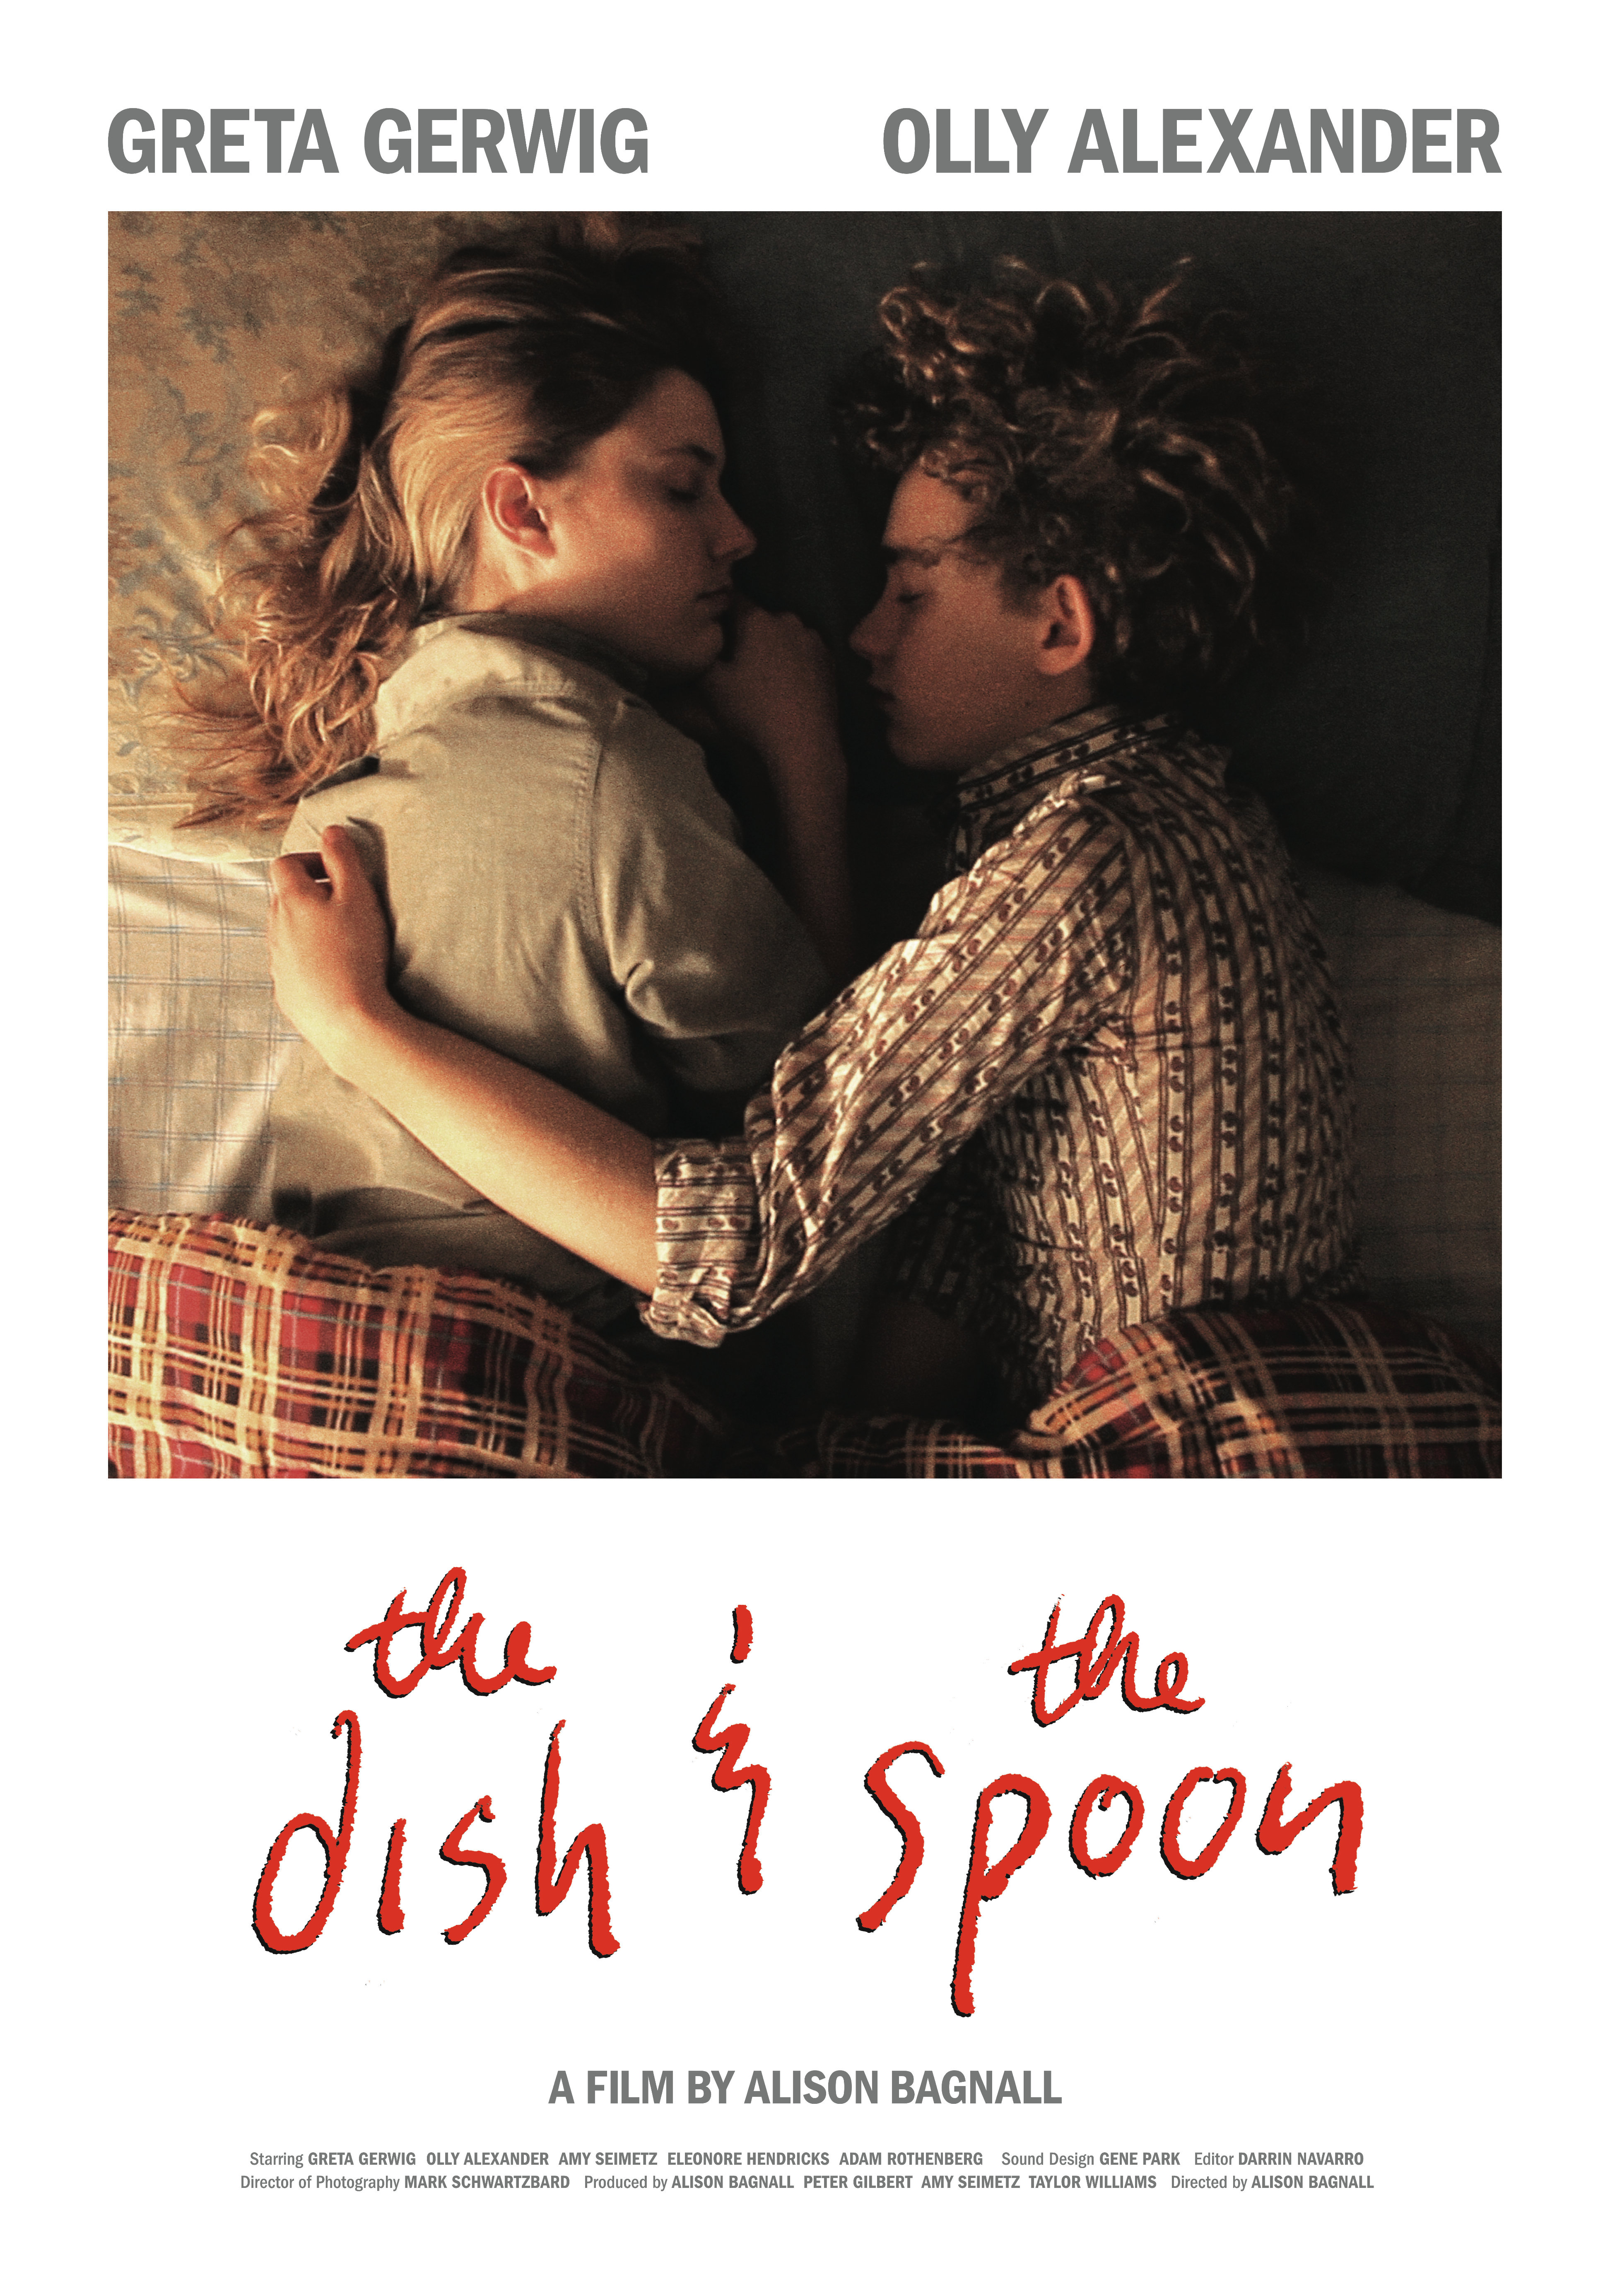 Greta Gerwig and Olly Alexander in The Dish & the Spoon (2011)